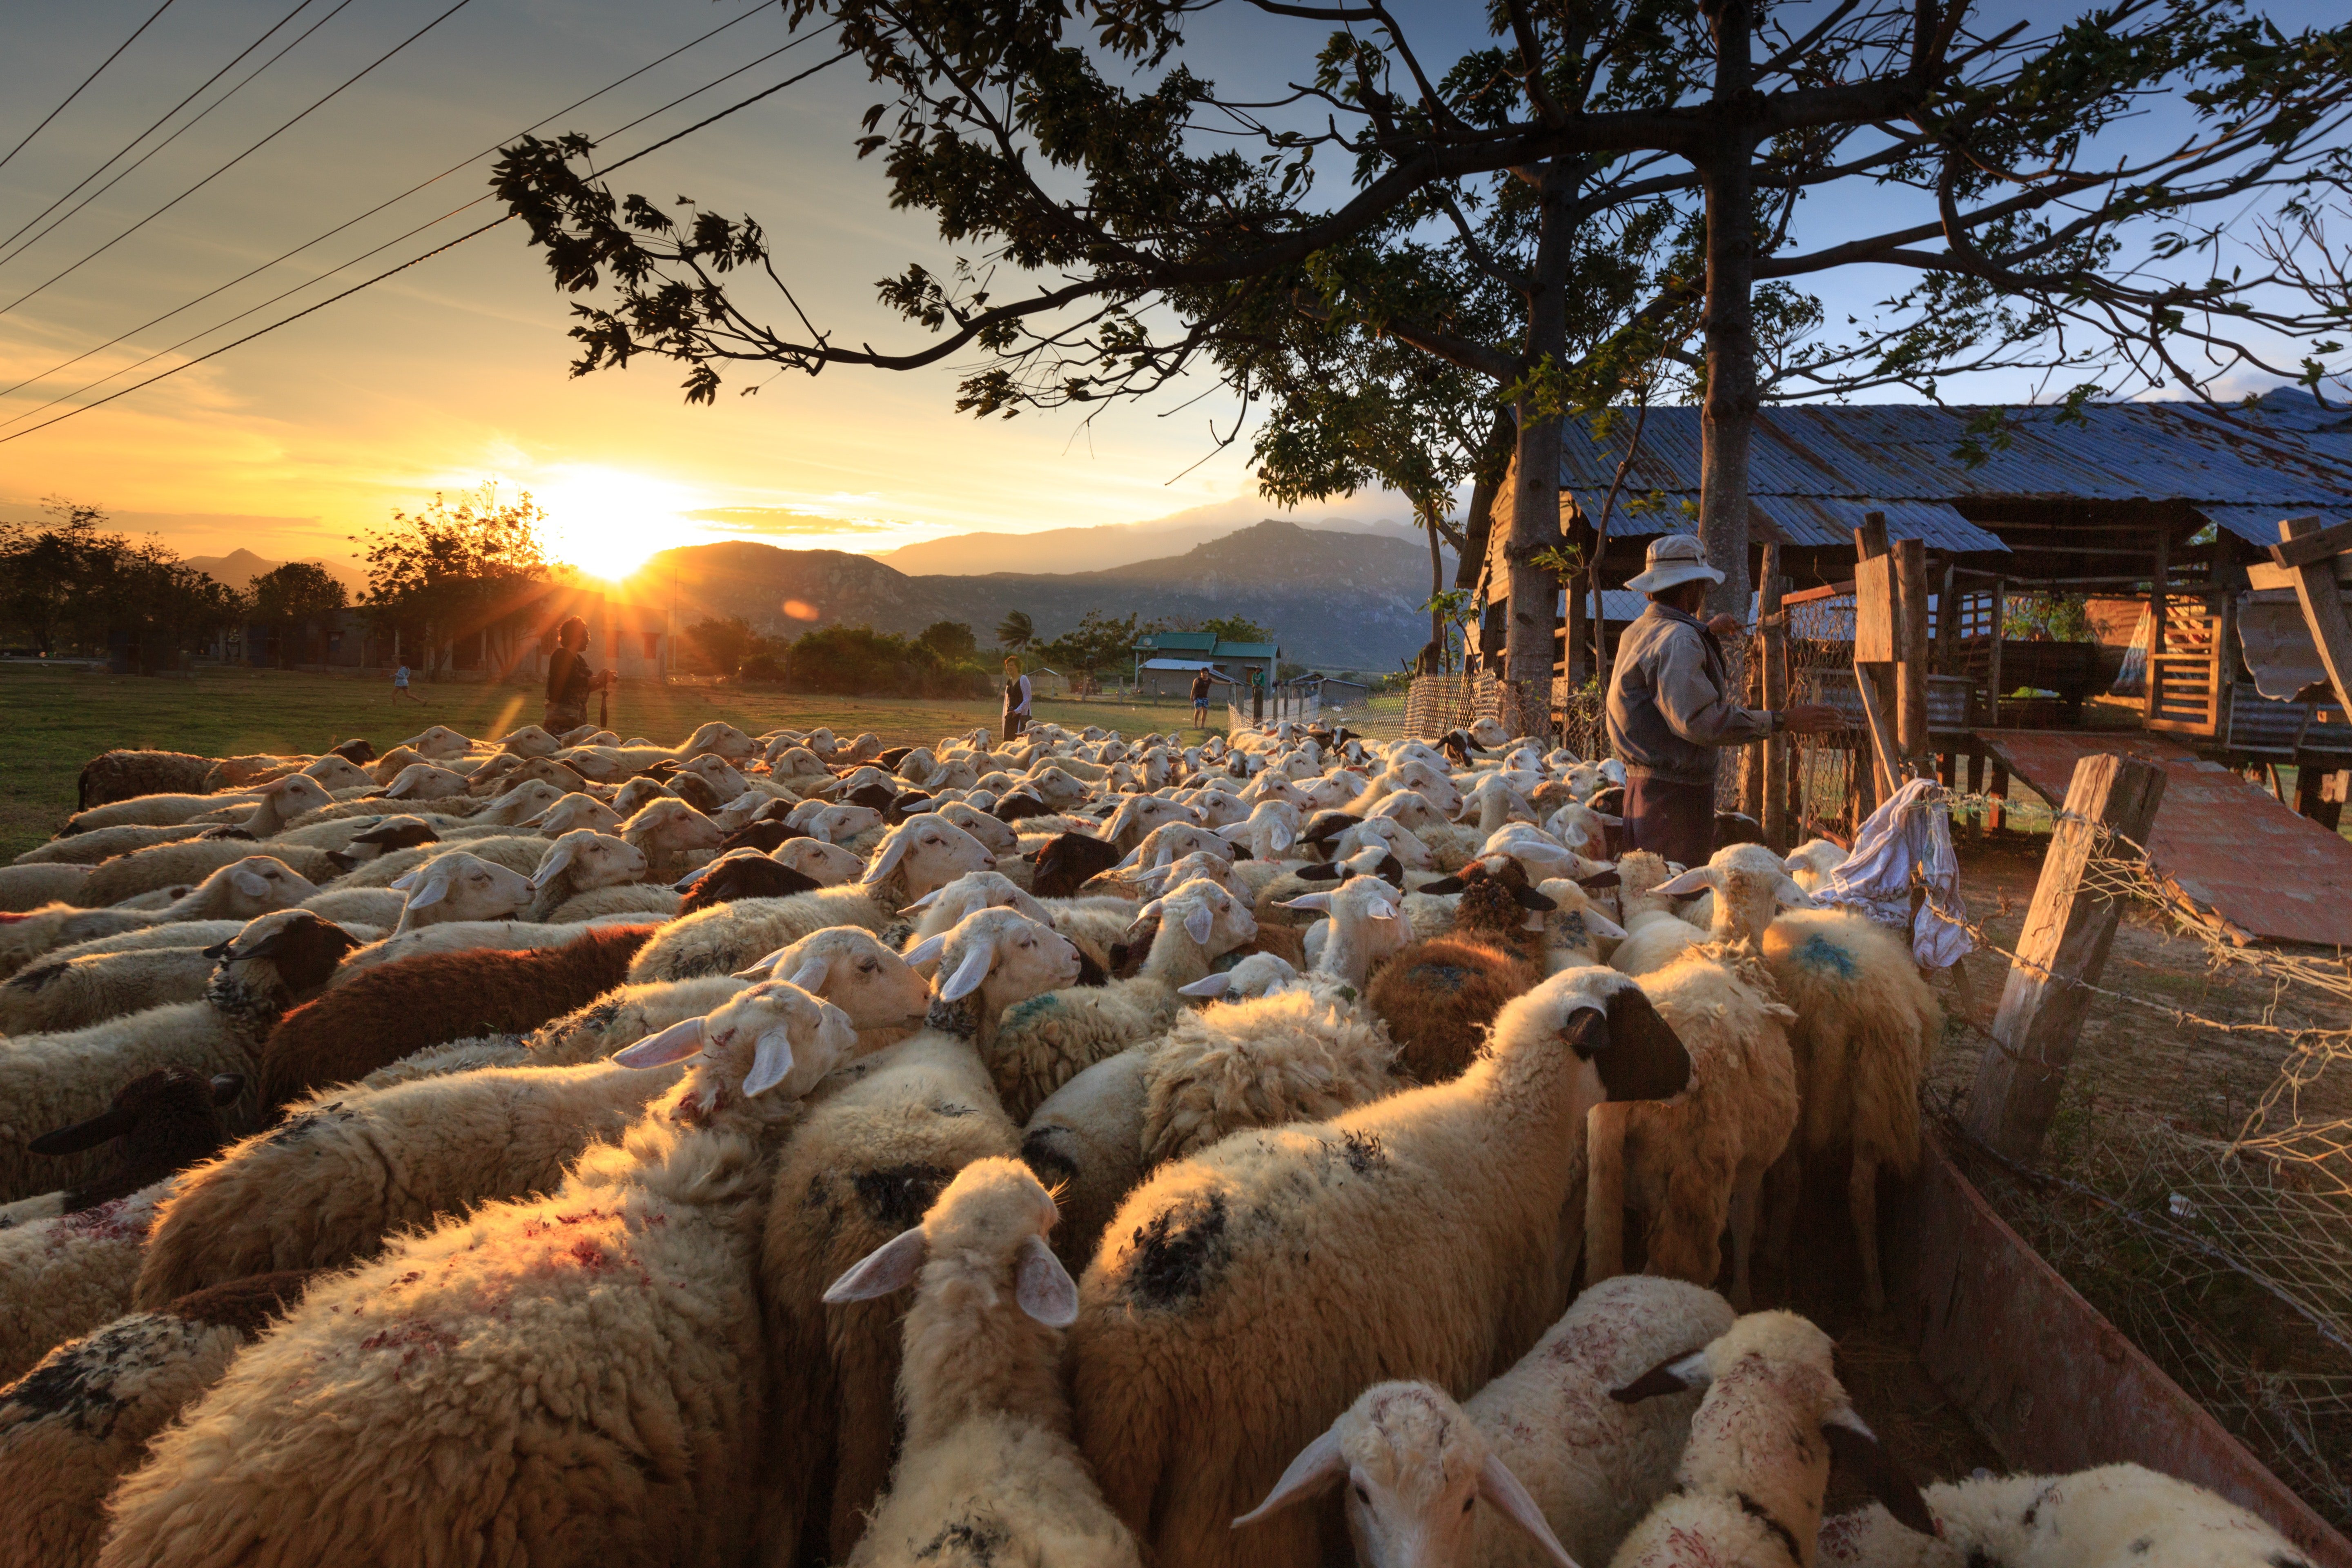 Pictured - An image of a herd of sheep standing outside a yard with a shepherd | Source: Pexels 